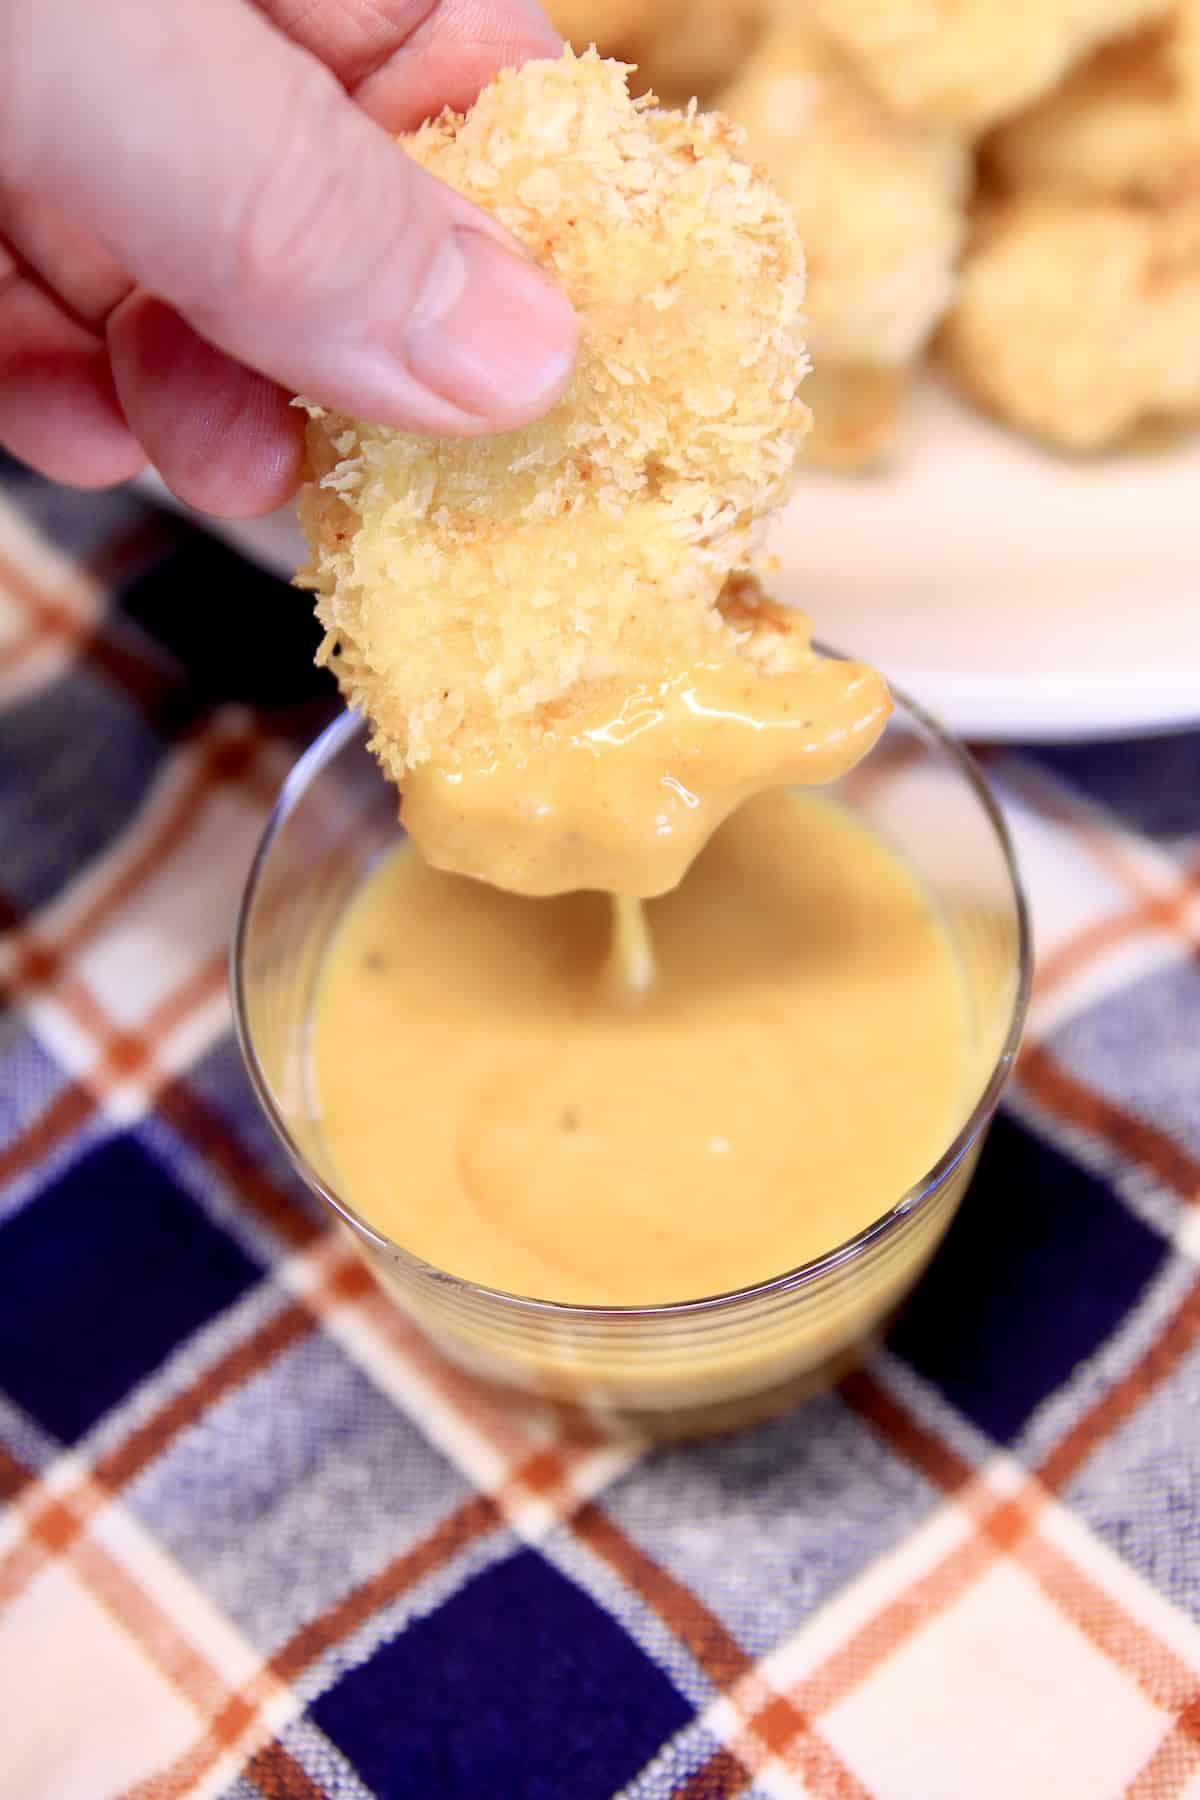 Chicken nugget dipping intoChick Fil A Sauce.